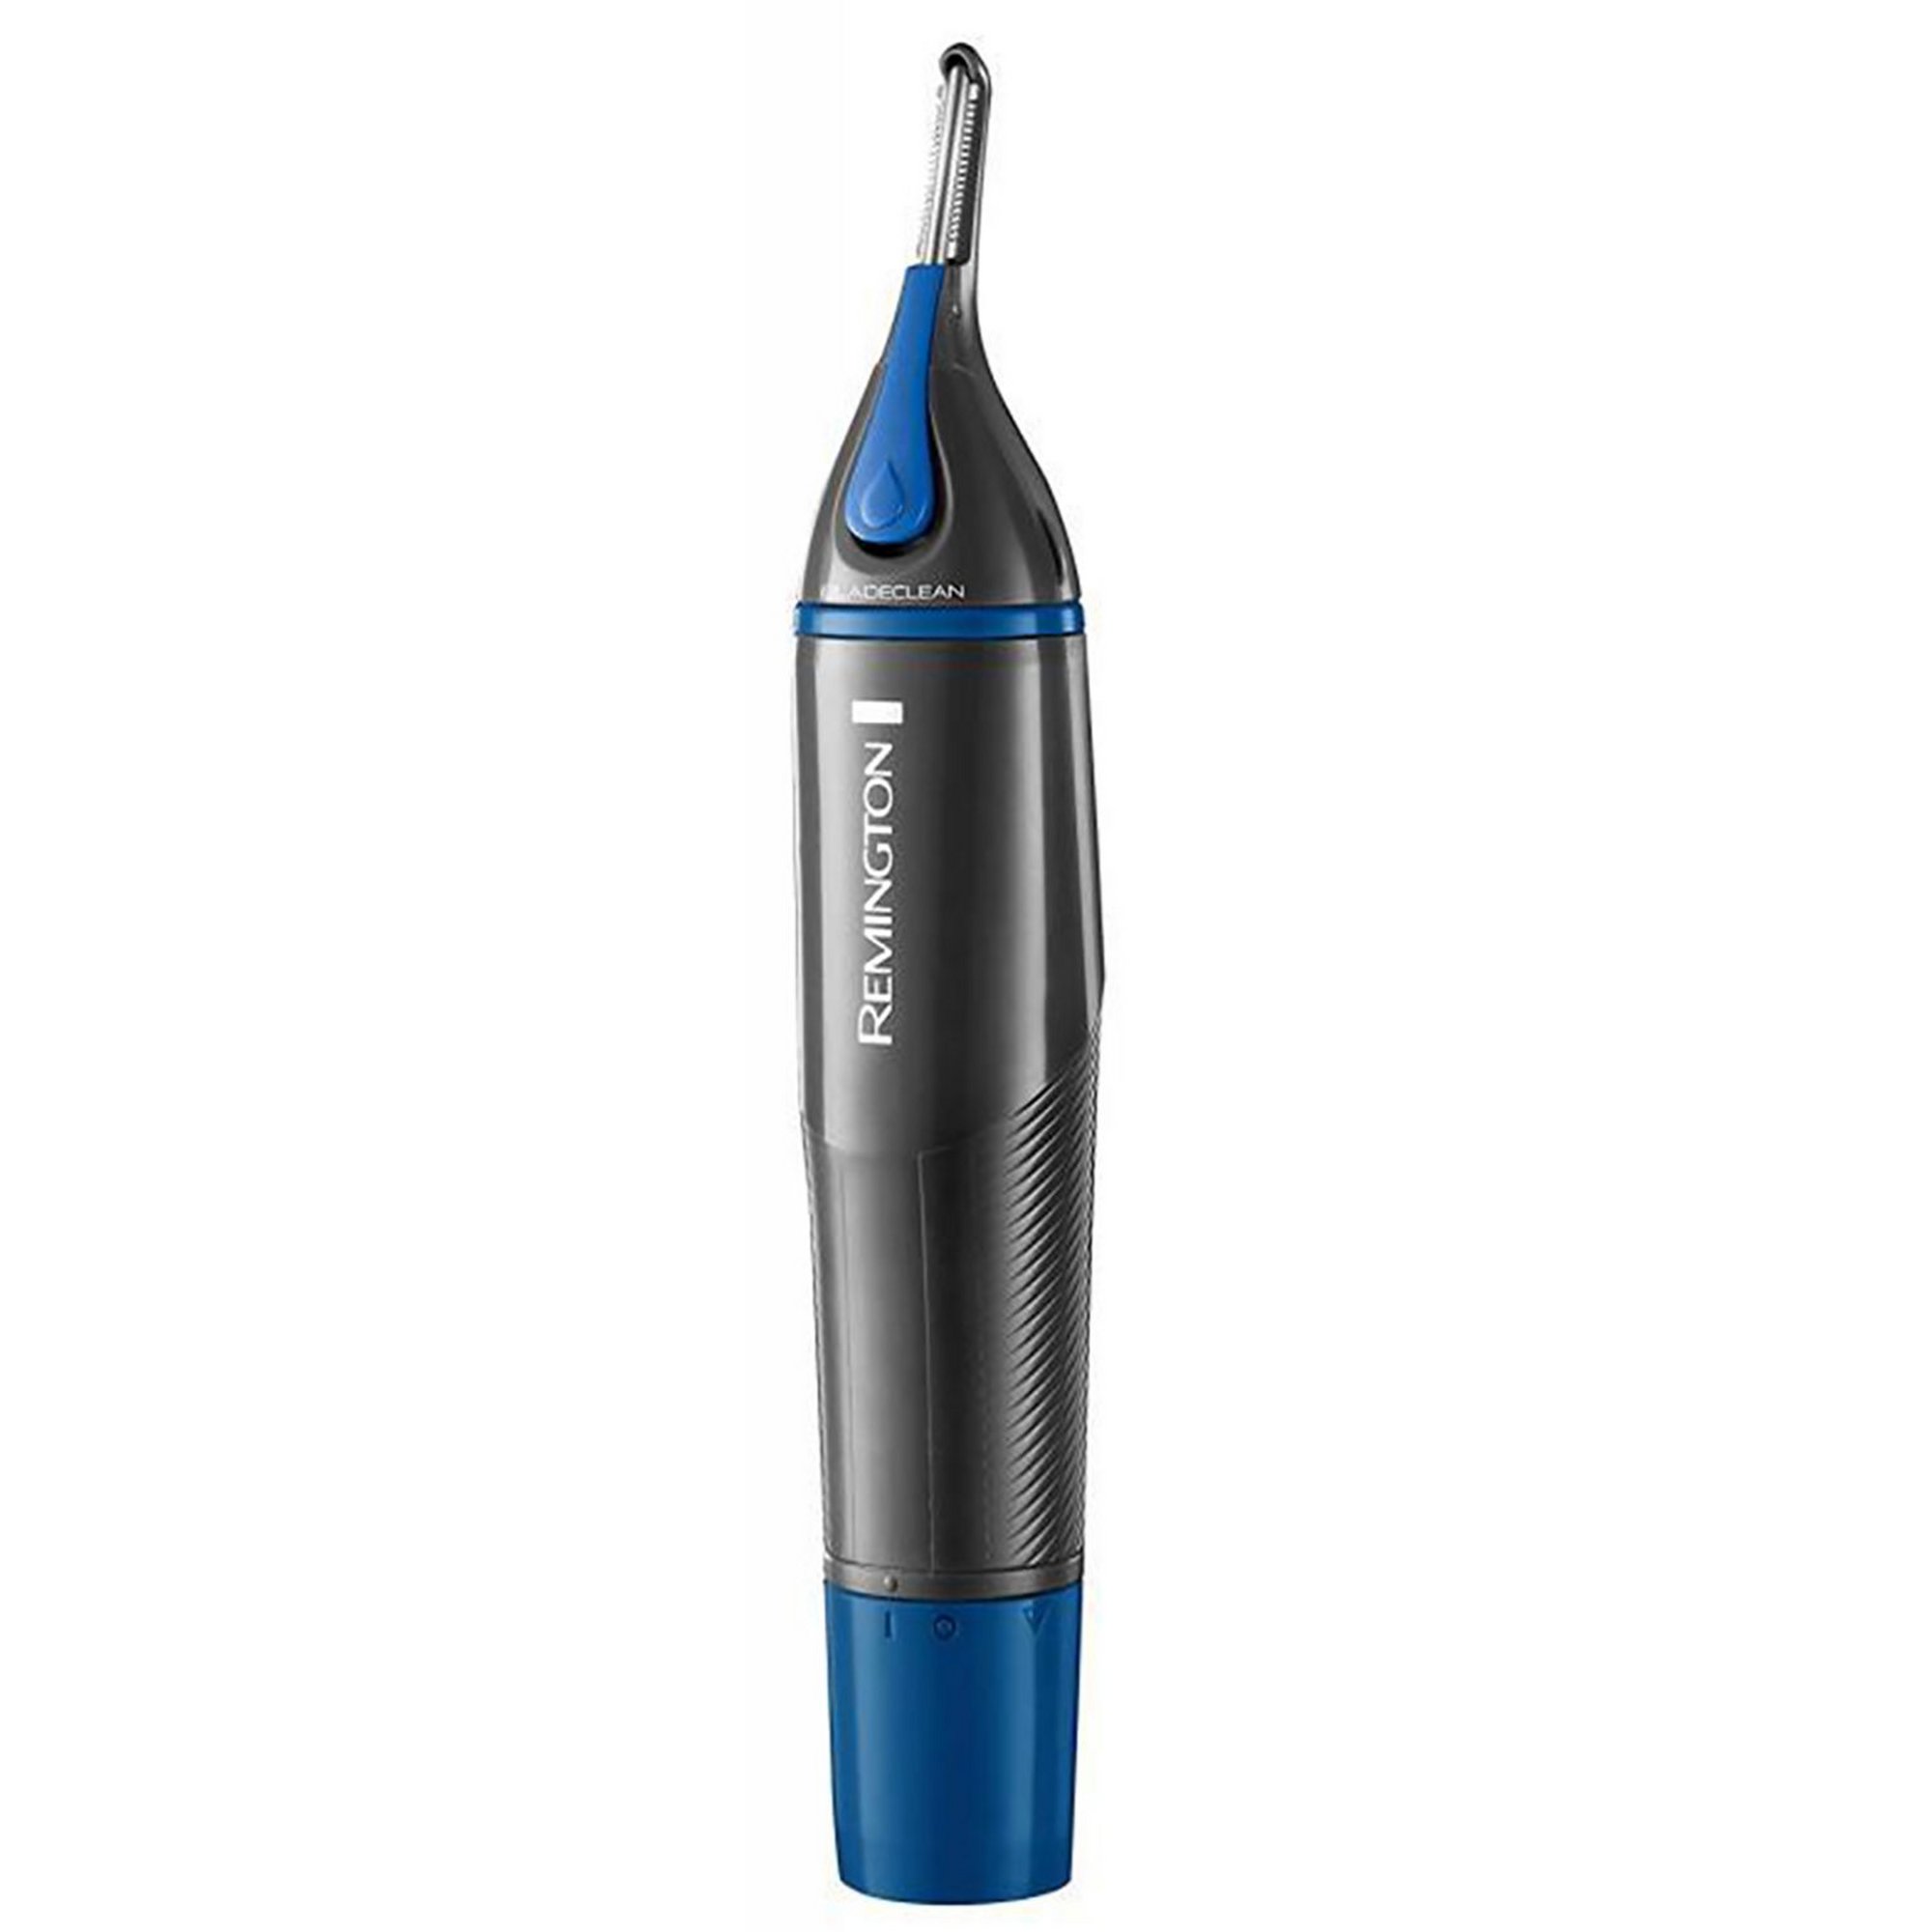 Remington Personal Nano Series Nose and Ear Trimmer